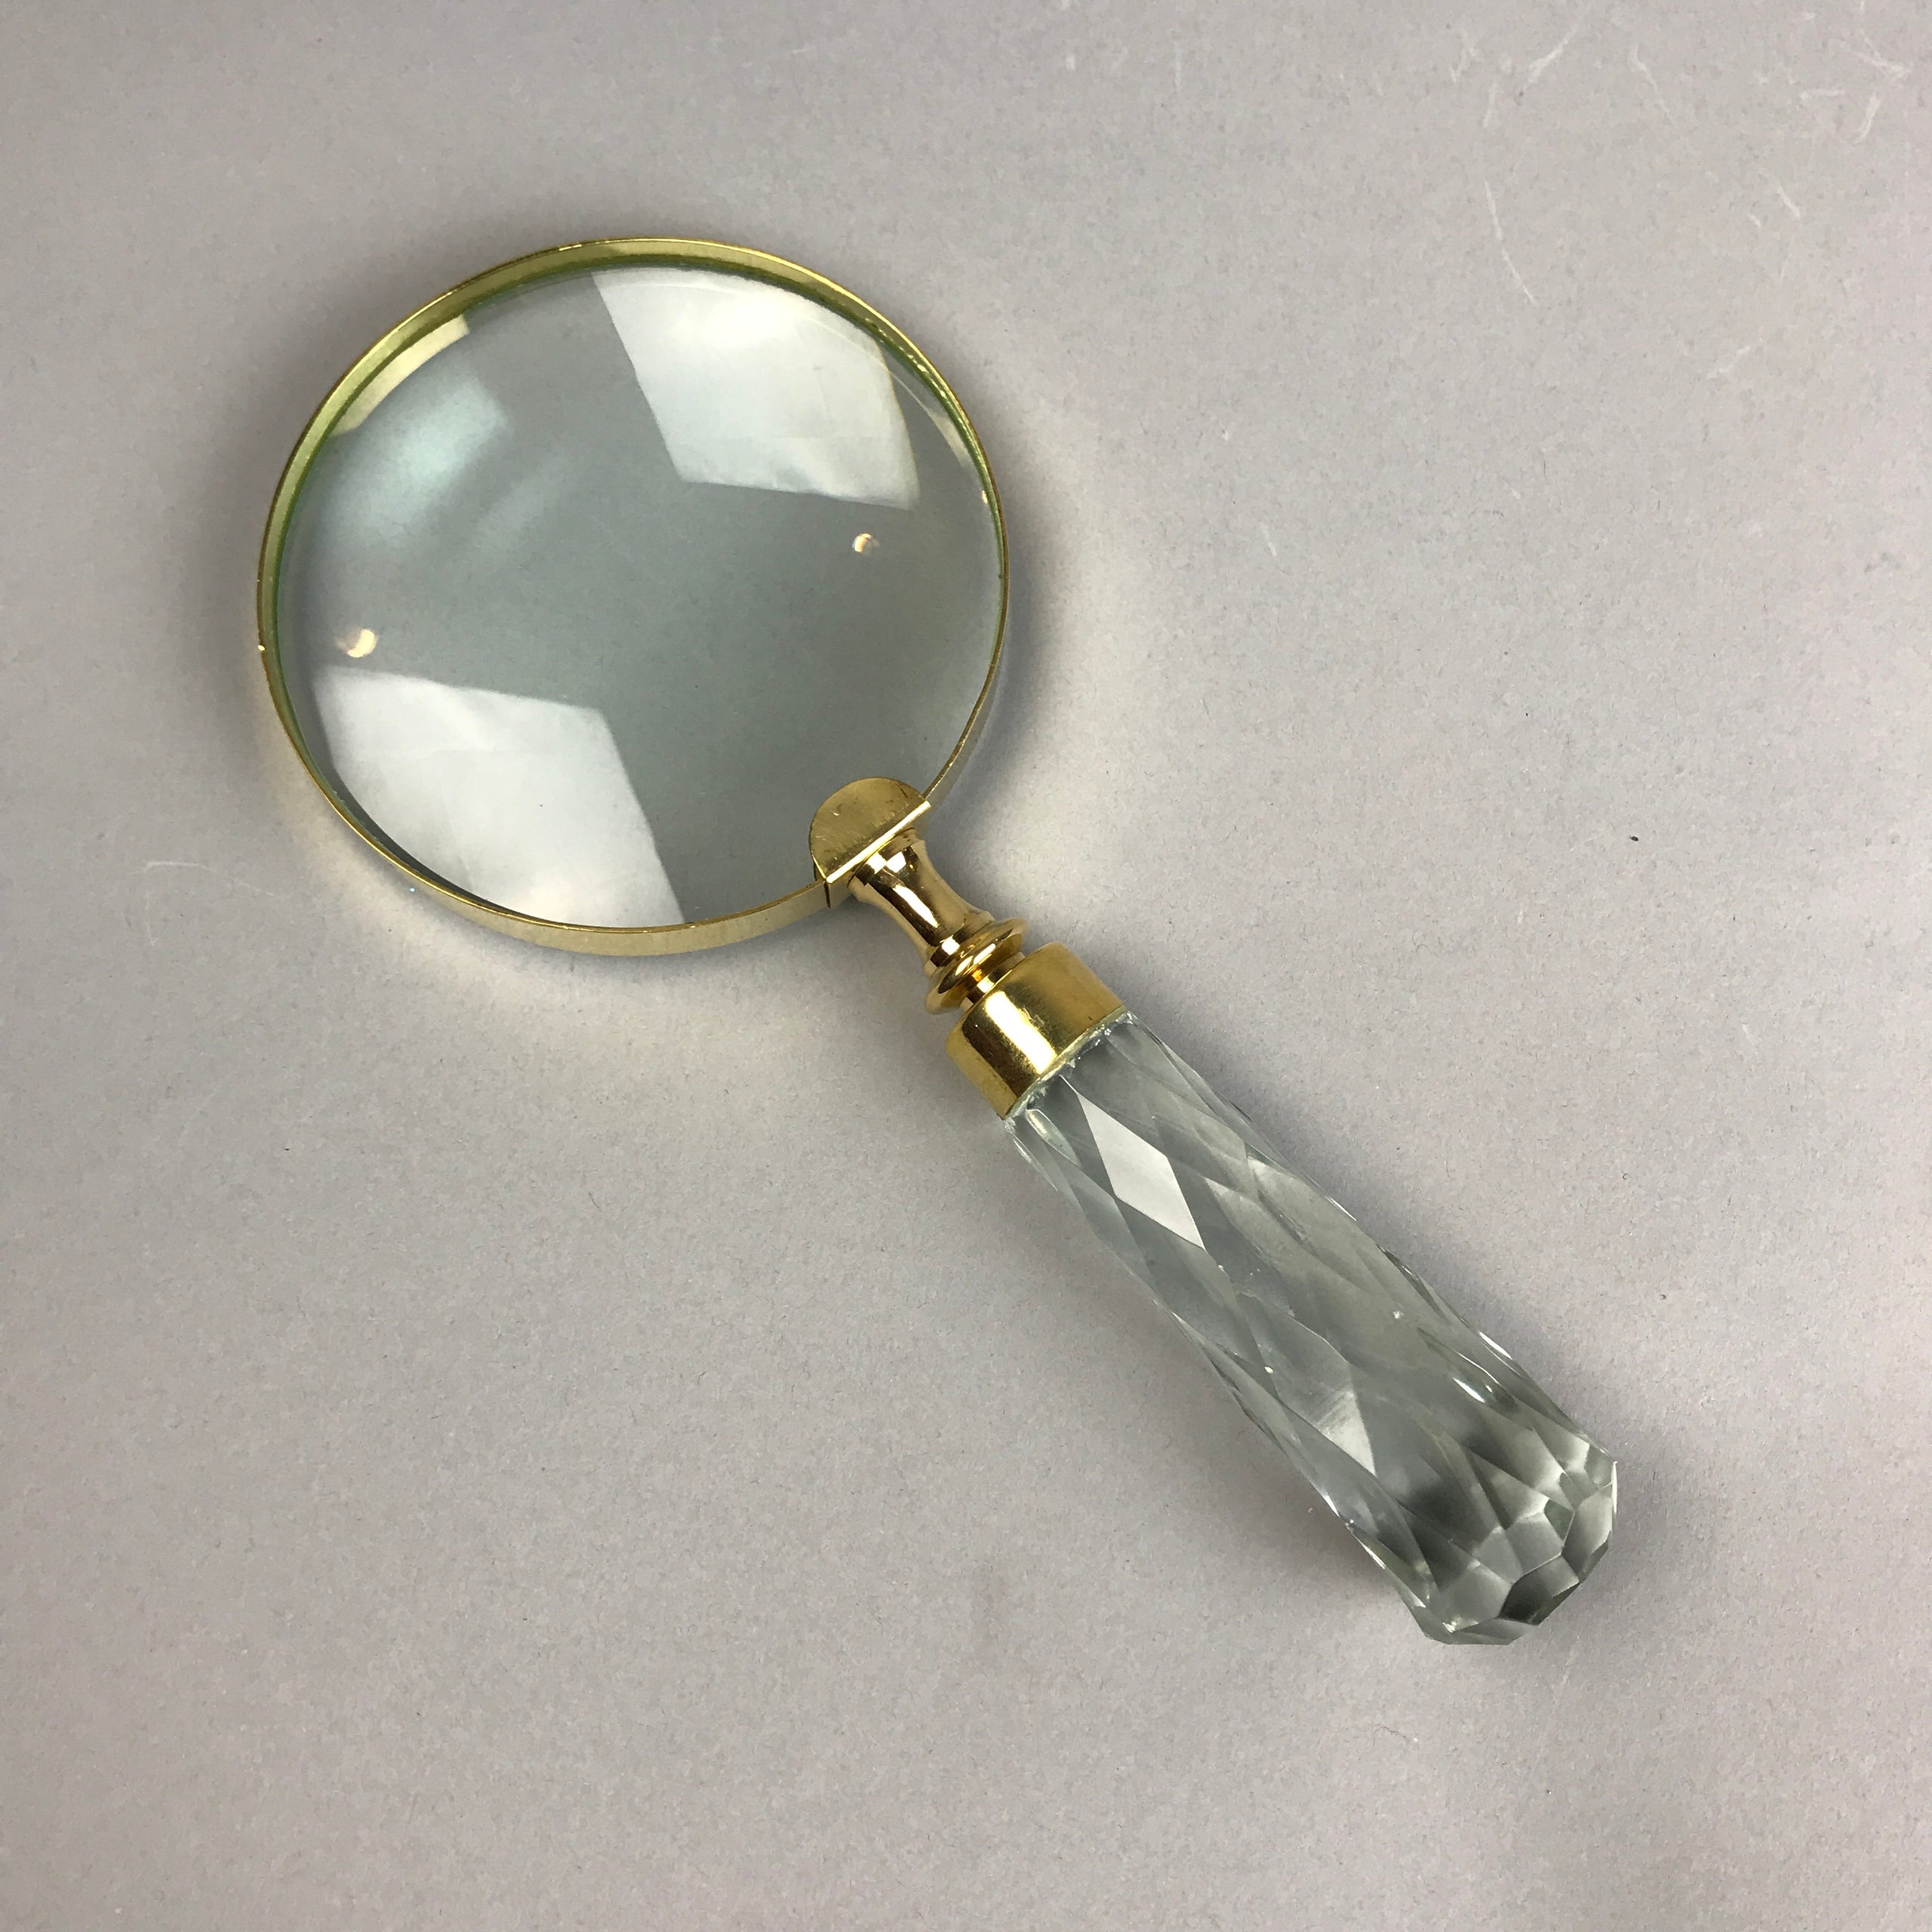 Small Magnifying Glass Carved Mother of Pearl Handle, Vintage Recycled  Antique Cutlery, Magnifier, Glass Lens, Great Gifts by Londoncutlers 